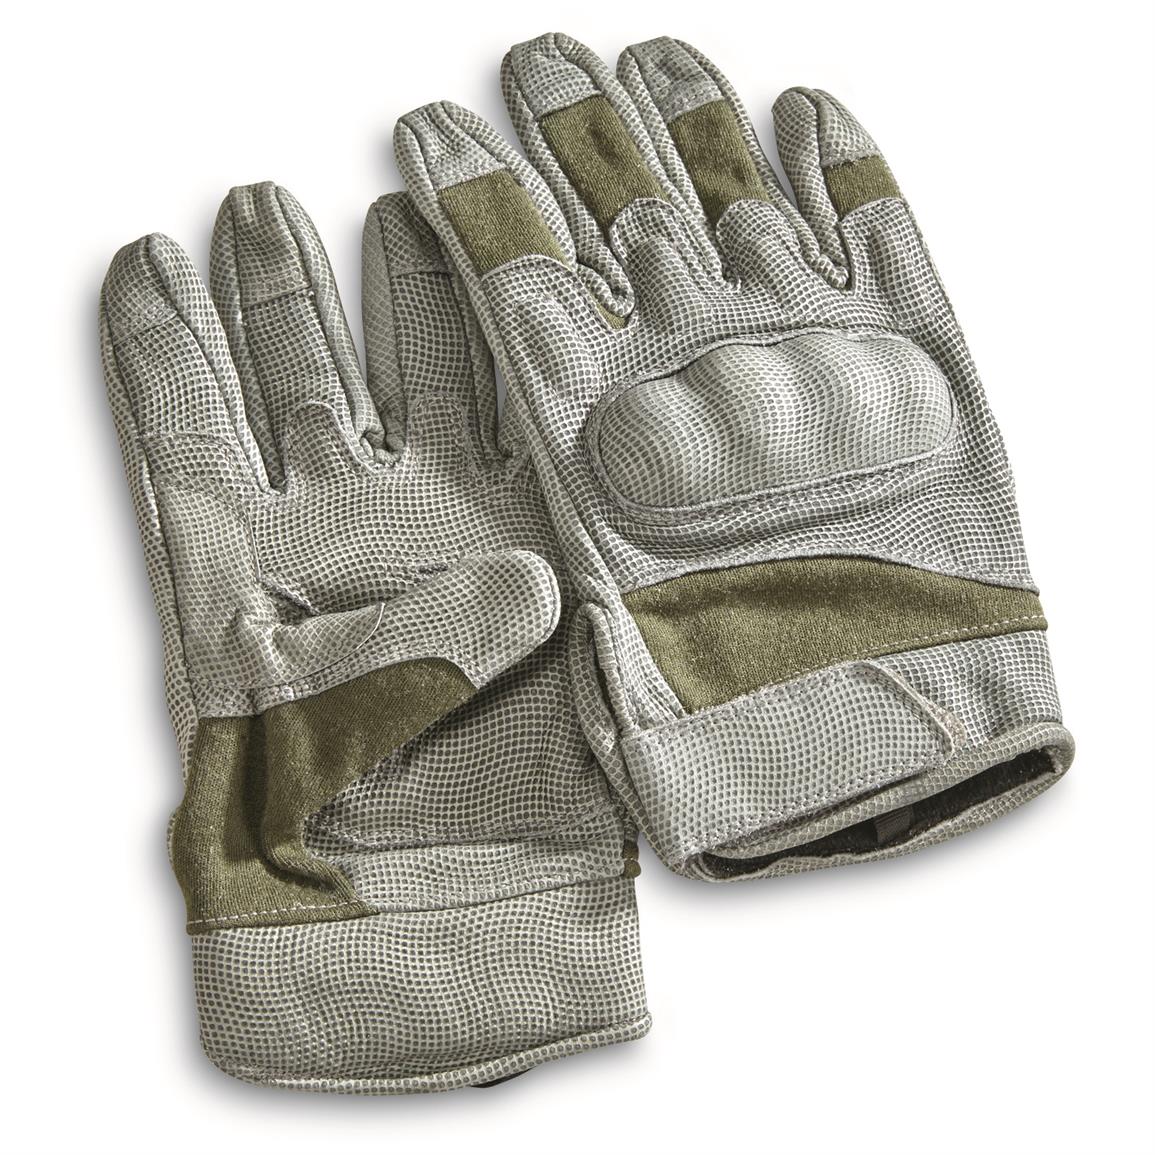 Mil-Tec Military Style Nomex Hard Knuckle Gloves, Foliage